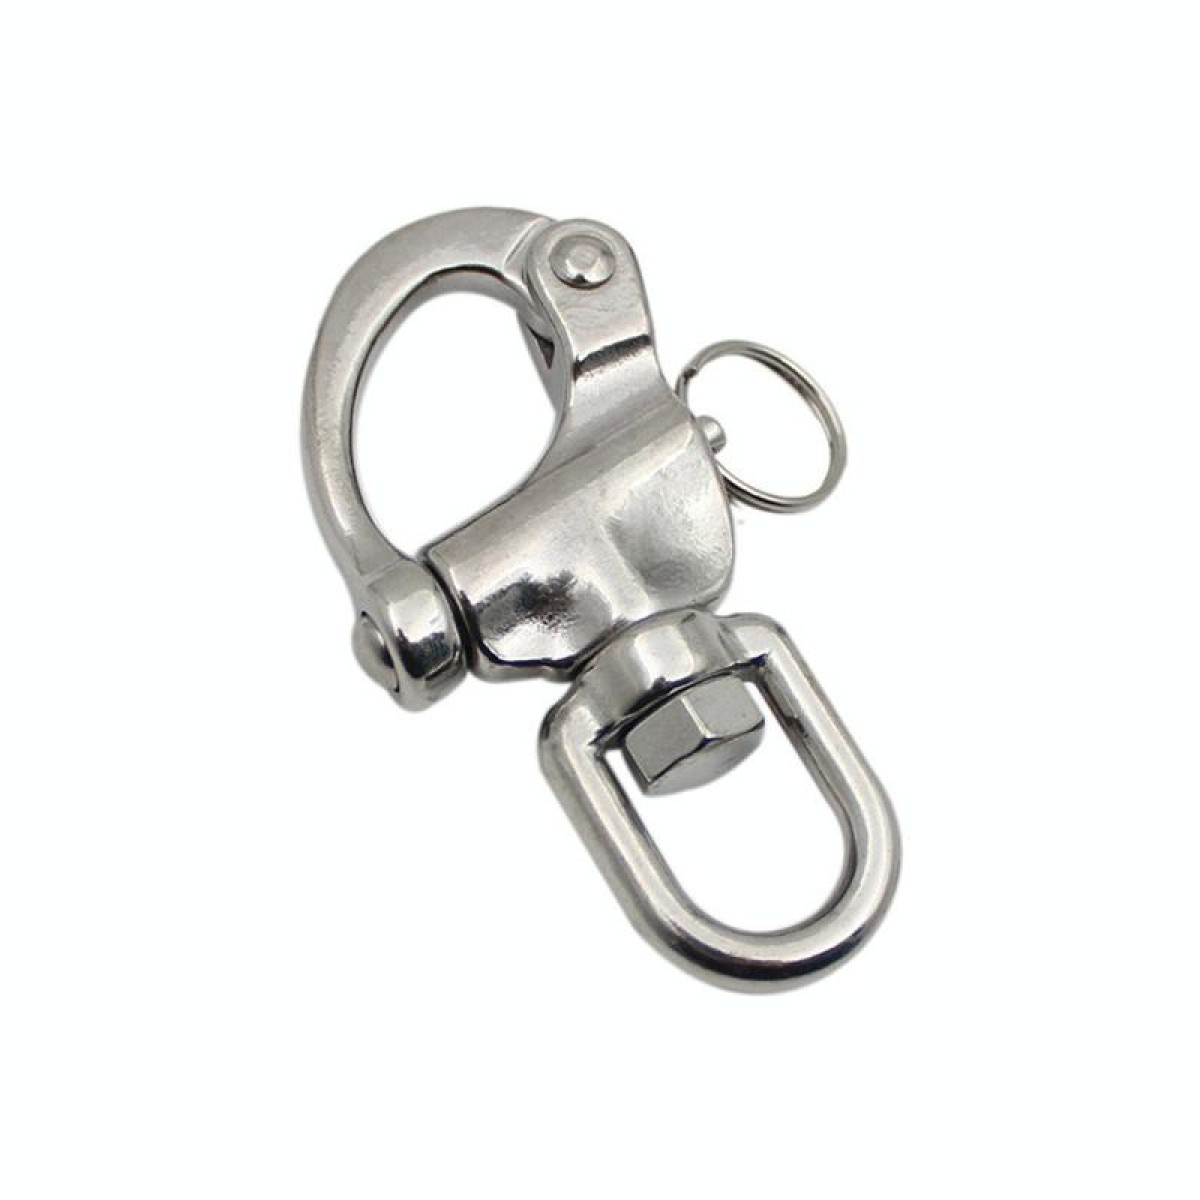 Yachting Sailing Stainless Steel Coil Type Rotary Spring Shackle, Specification: 87mm